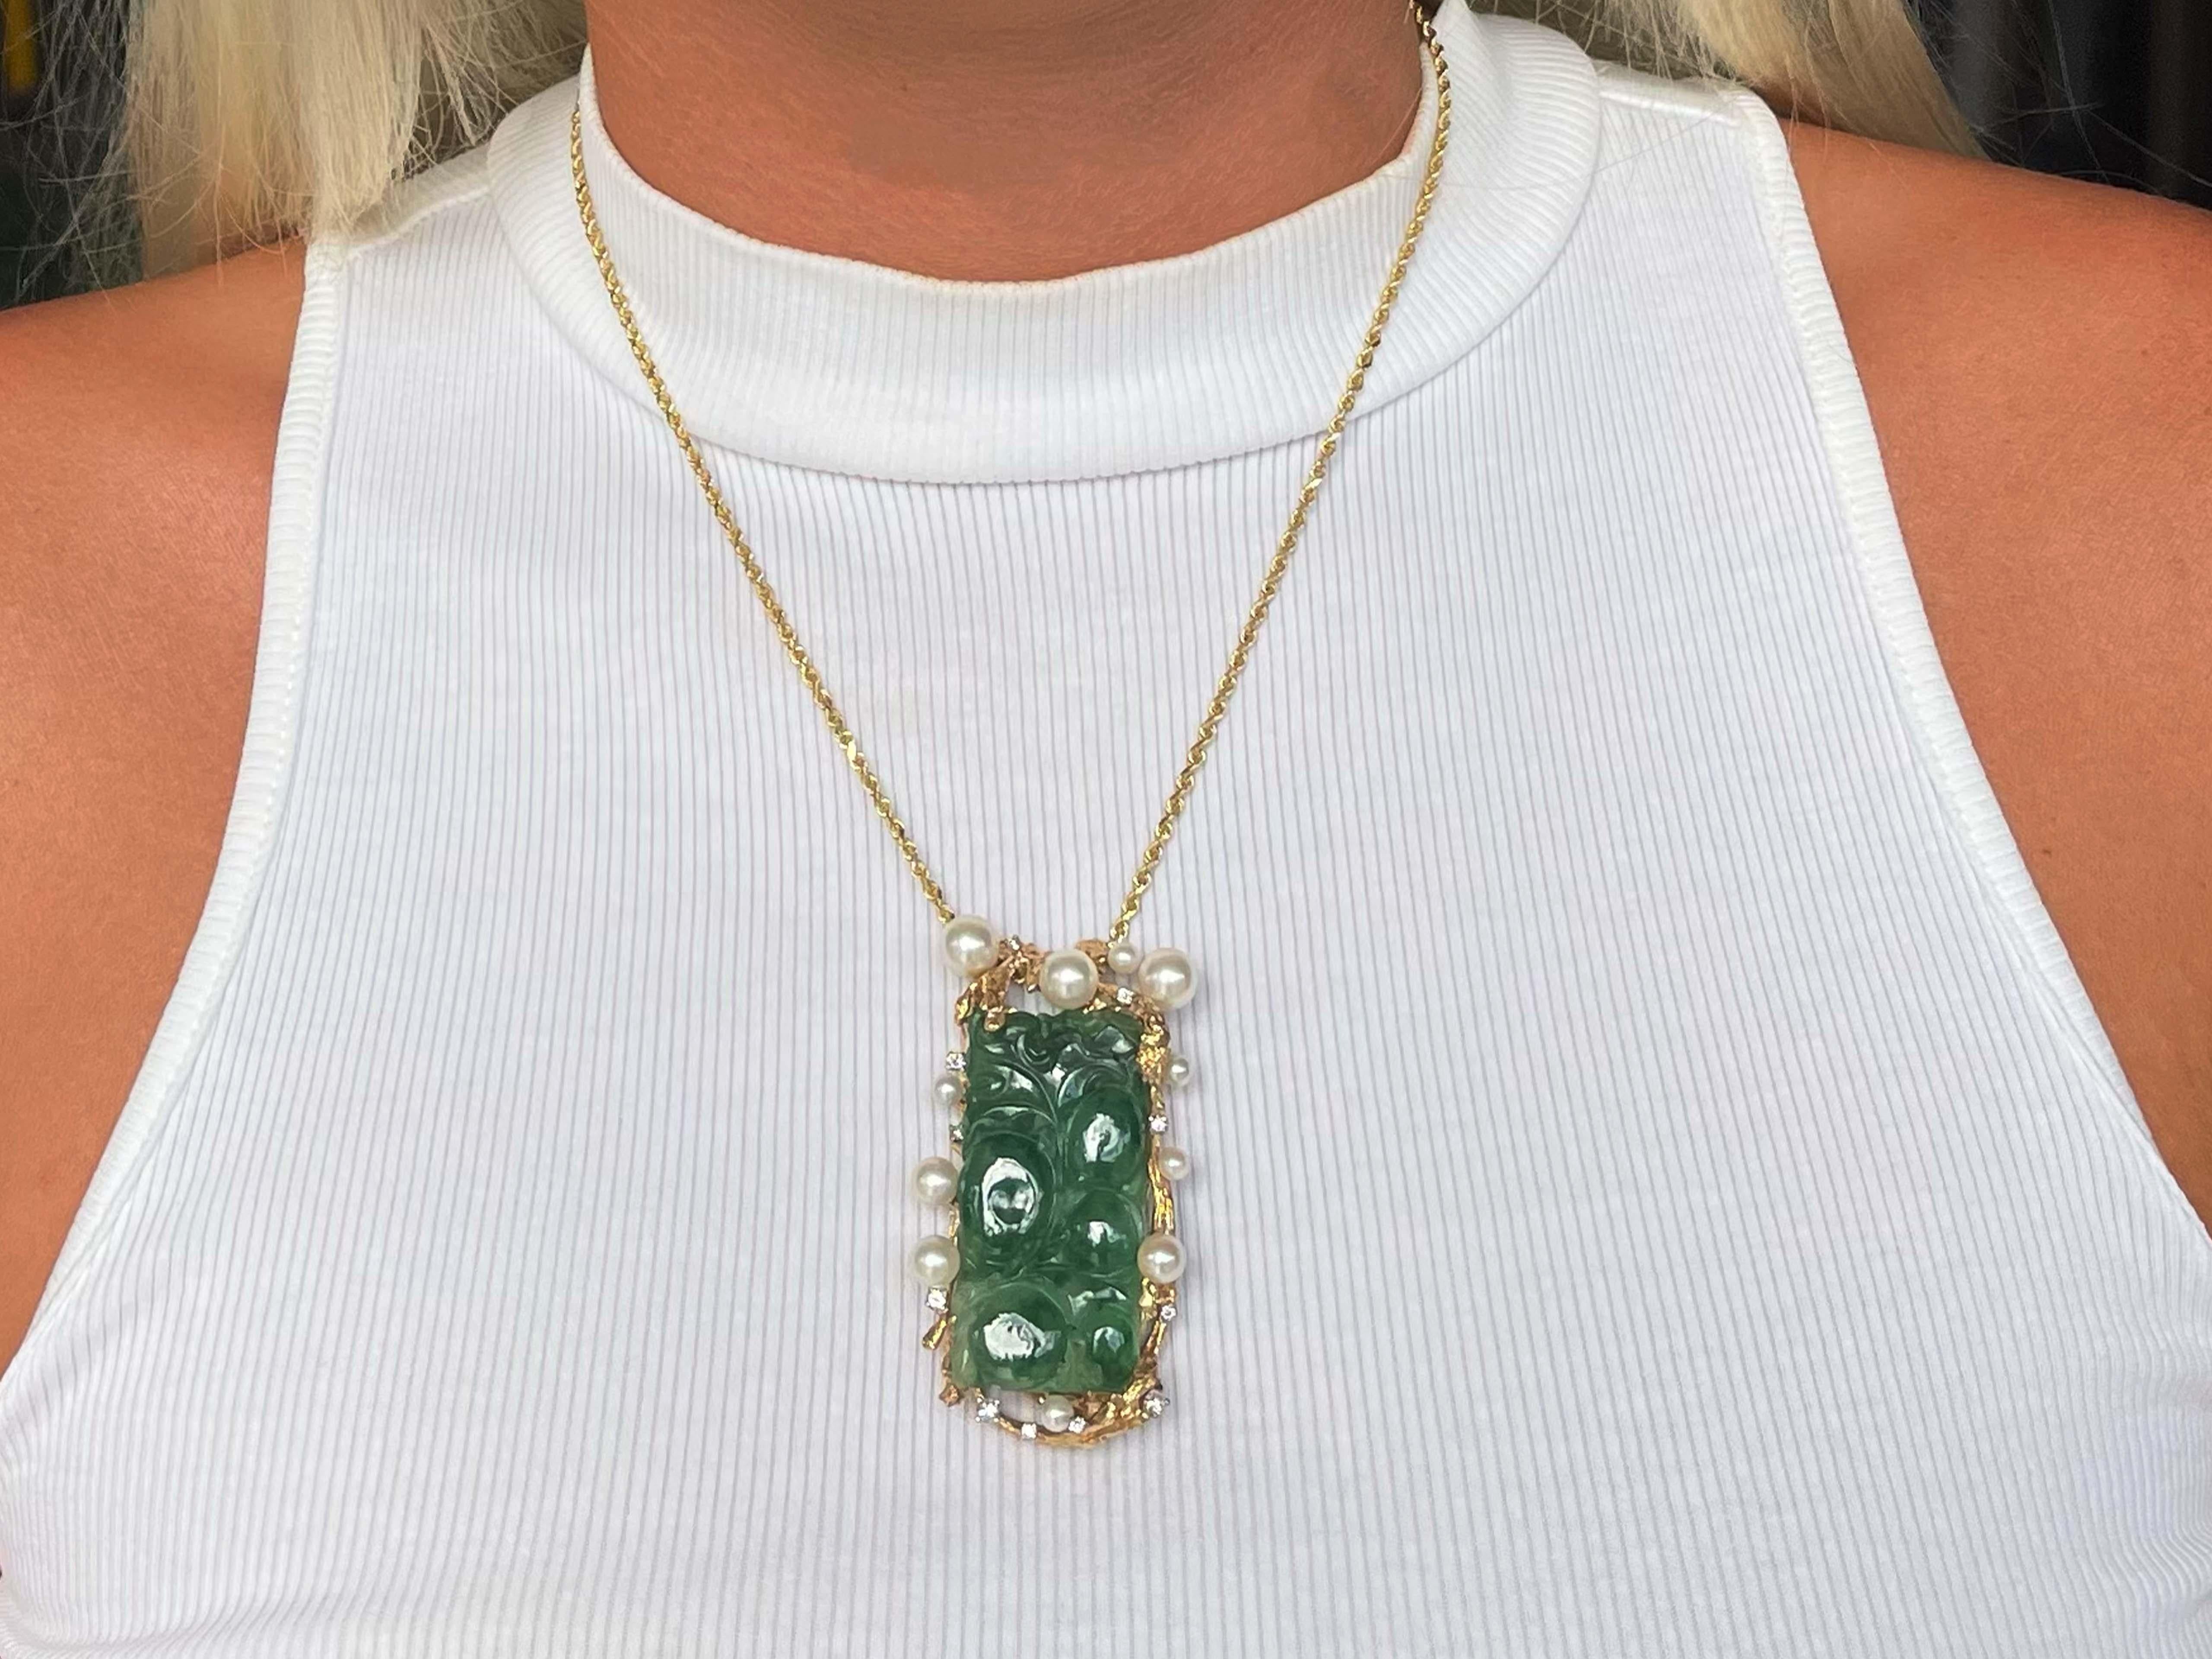 Vintage Carved Green Jadeite Jade Diamond and Pearl Pendant in 14k Yellow Gold. Large rectangular shape beautifully carved and pierced green jadeite jade randomly surrounded by  Diamonds and pearls. The Jade measures approximately 43 mm x 22 mm x 5